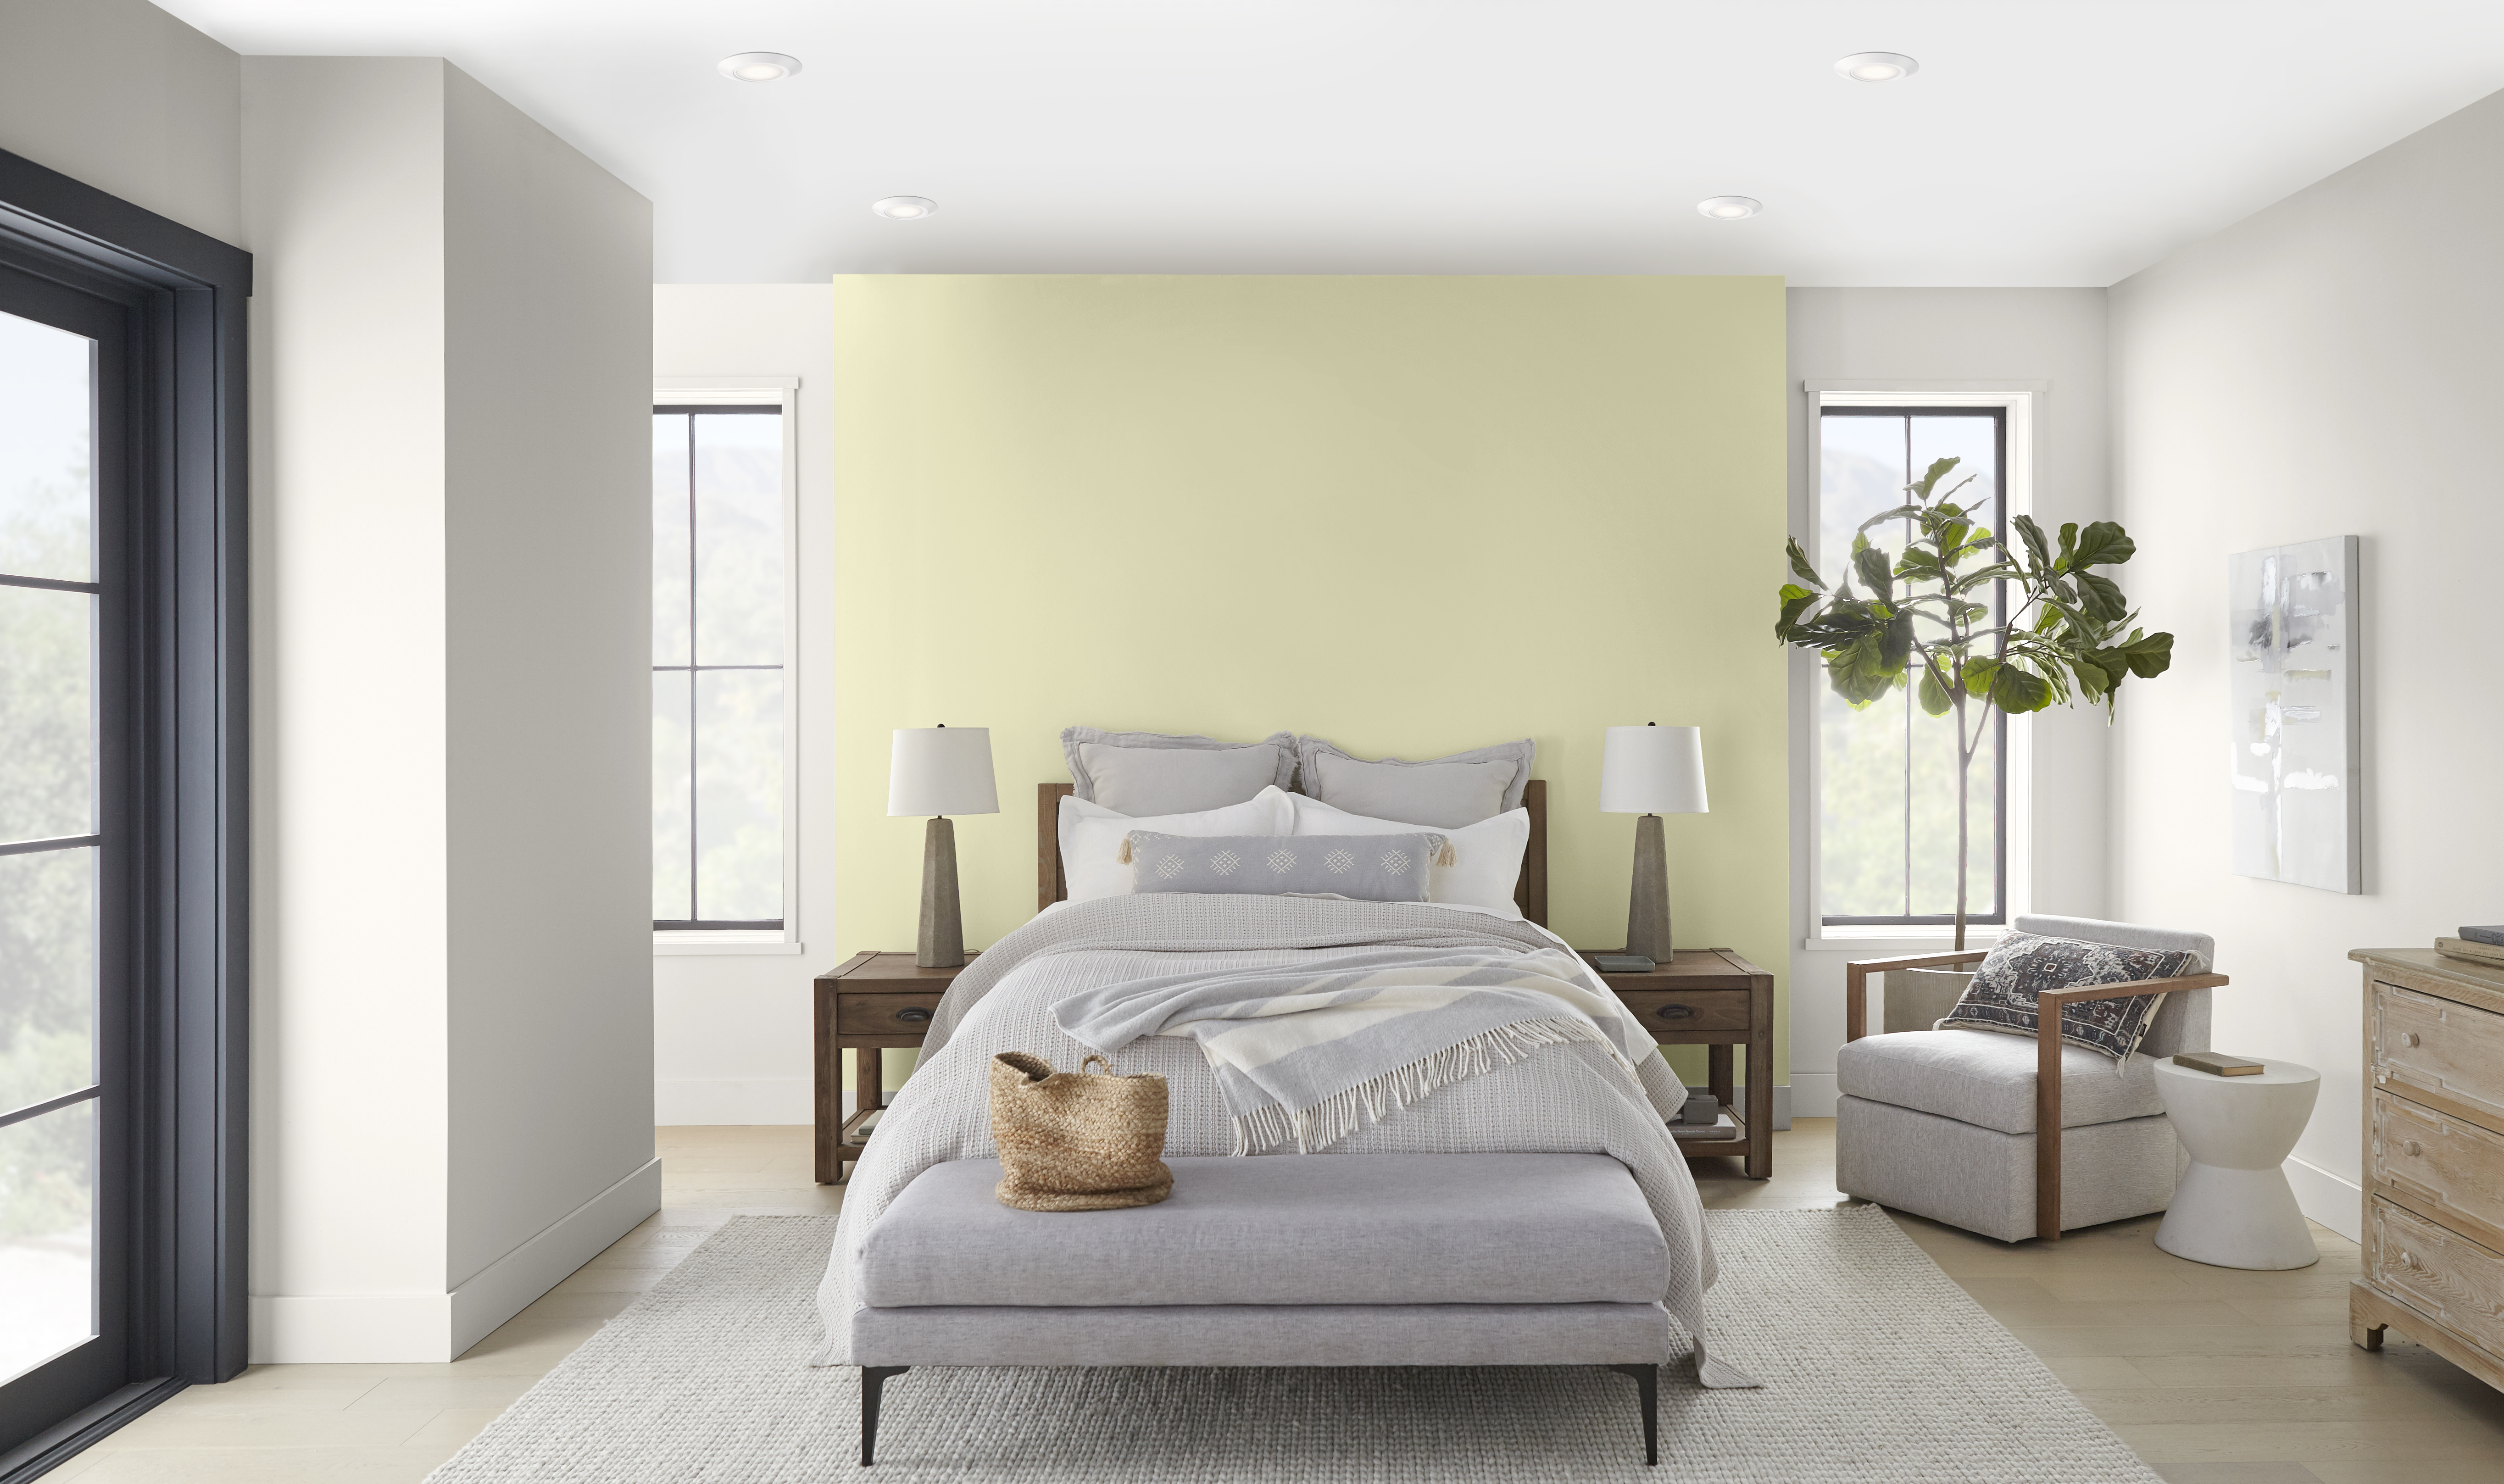 A bright and airy bedroom with an accent wall in the colour Hybrid behind the bed